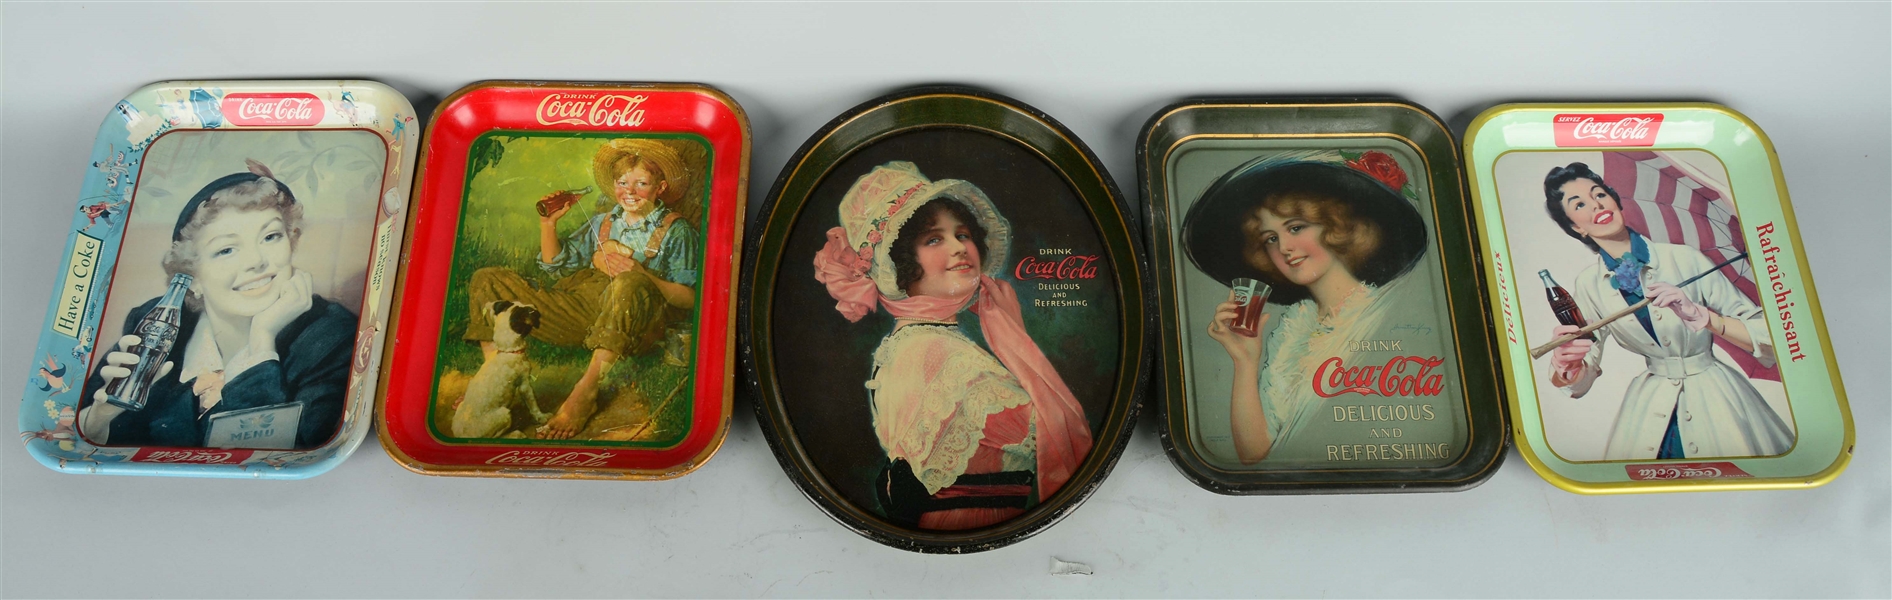 LOT OF 5: COCA-COLA ADVERTISING TRAYS. 